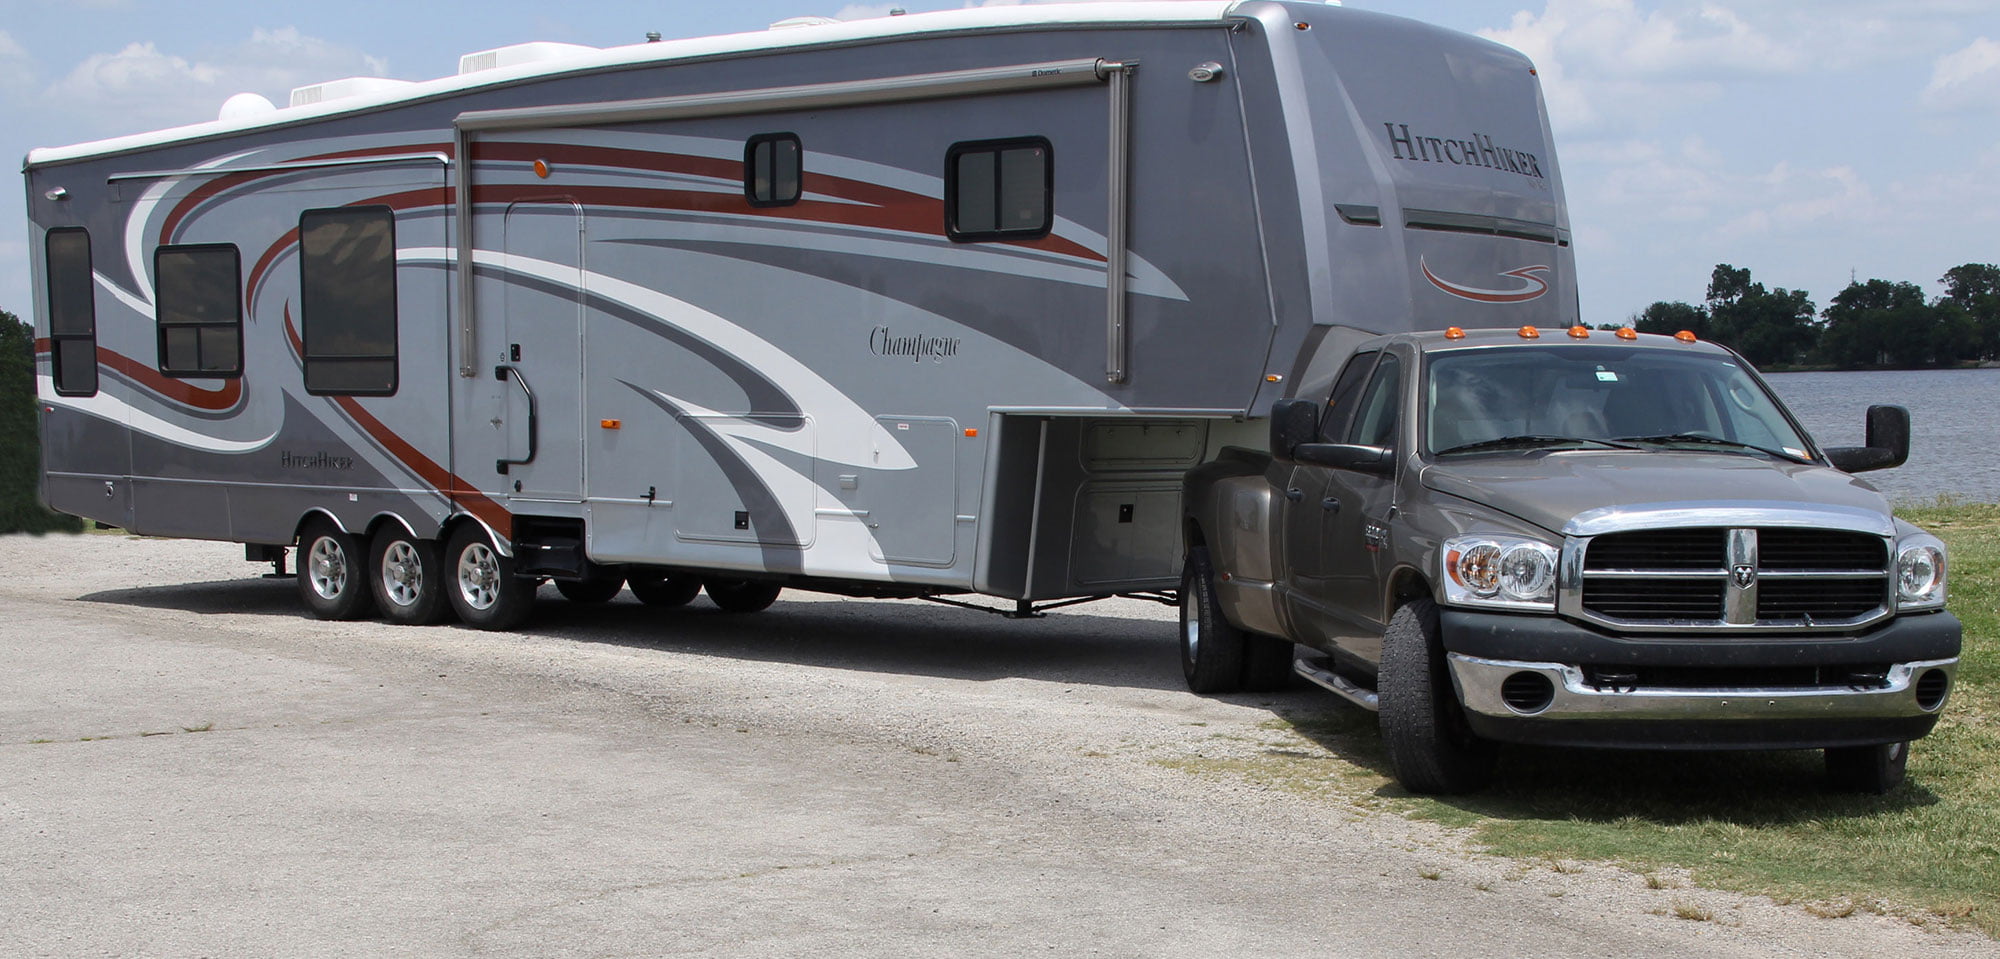 Featured image for “Should I convert my fifth wheel to gooseneck?”